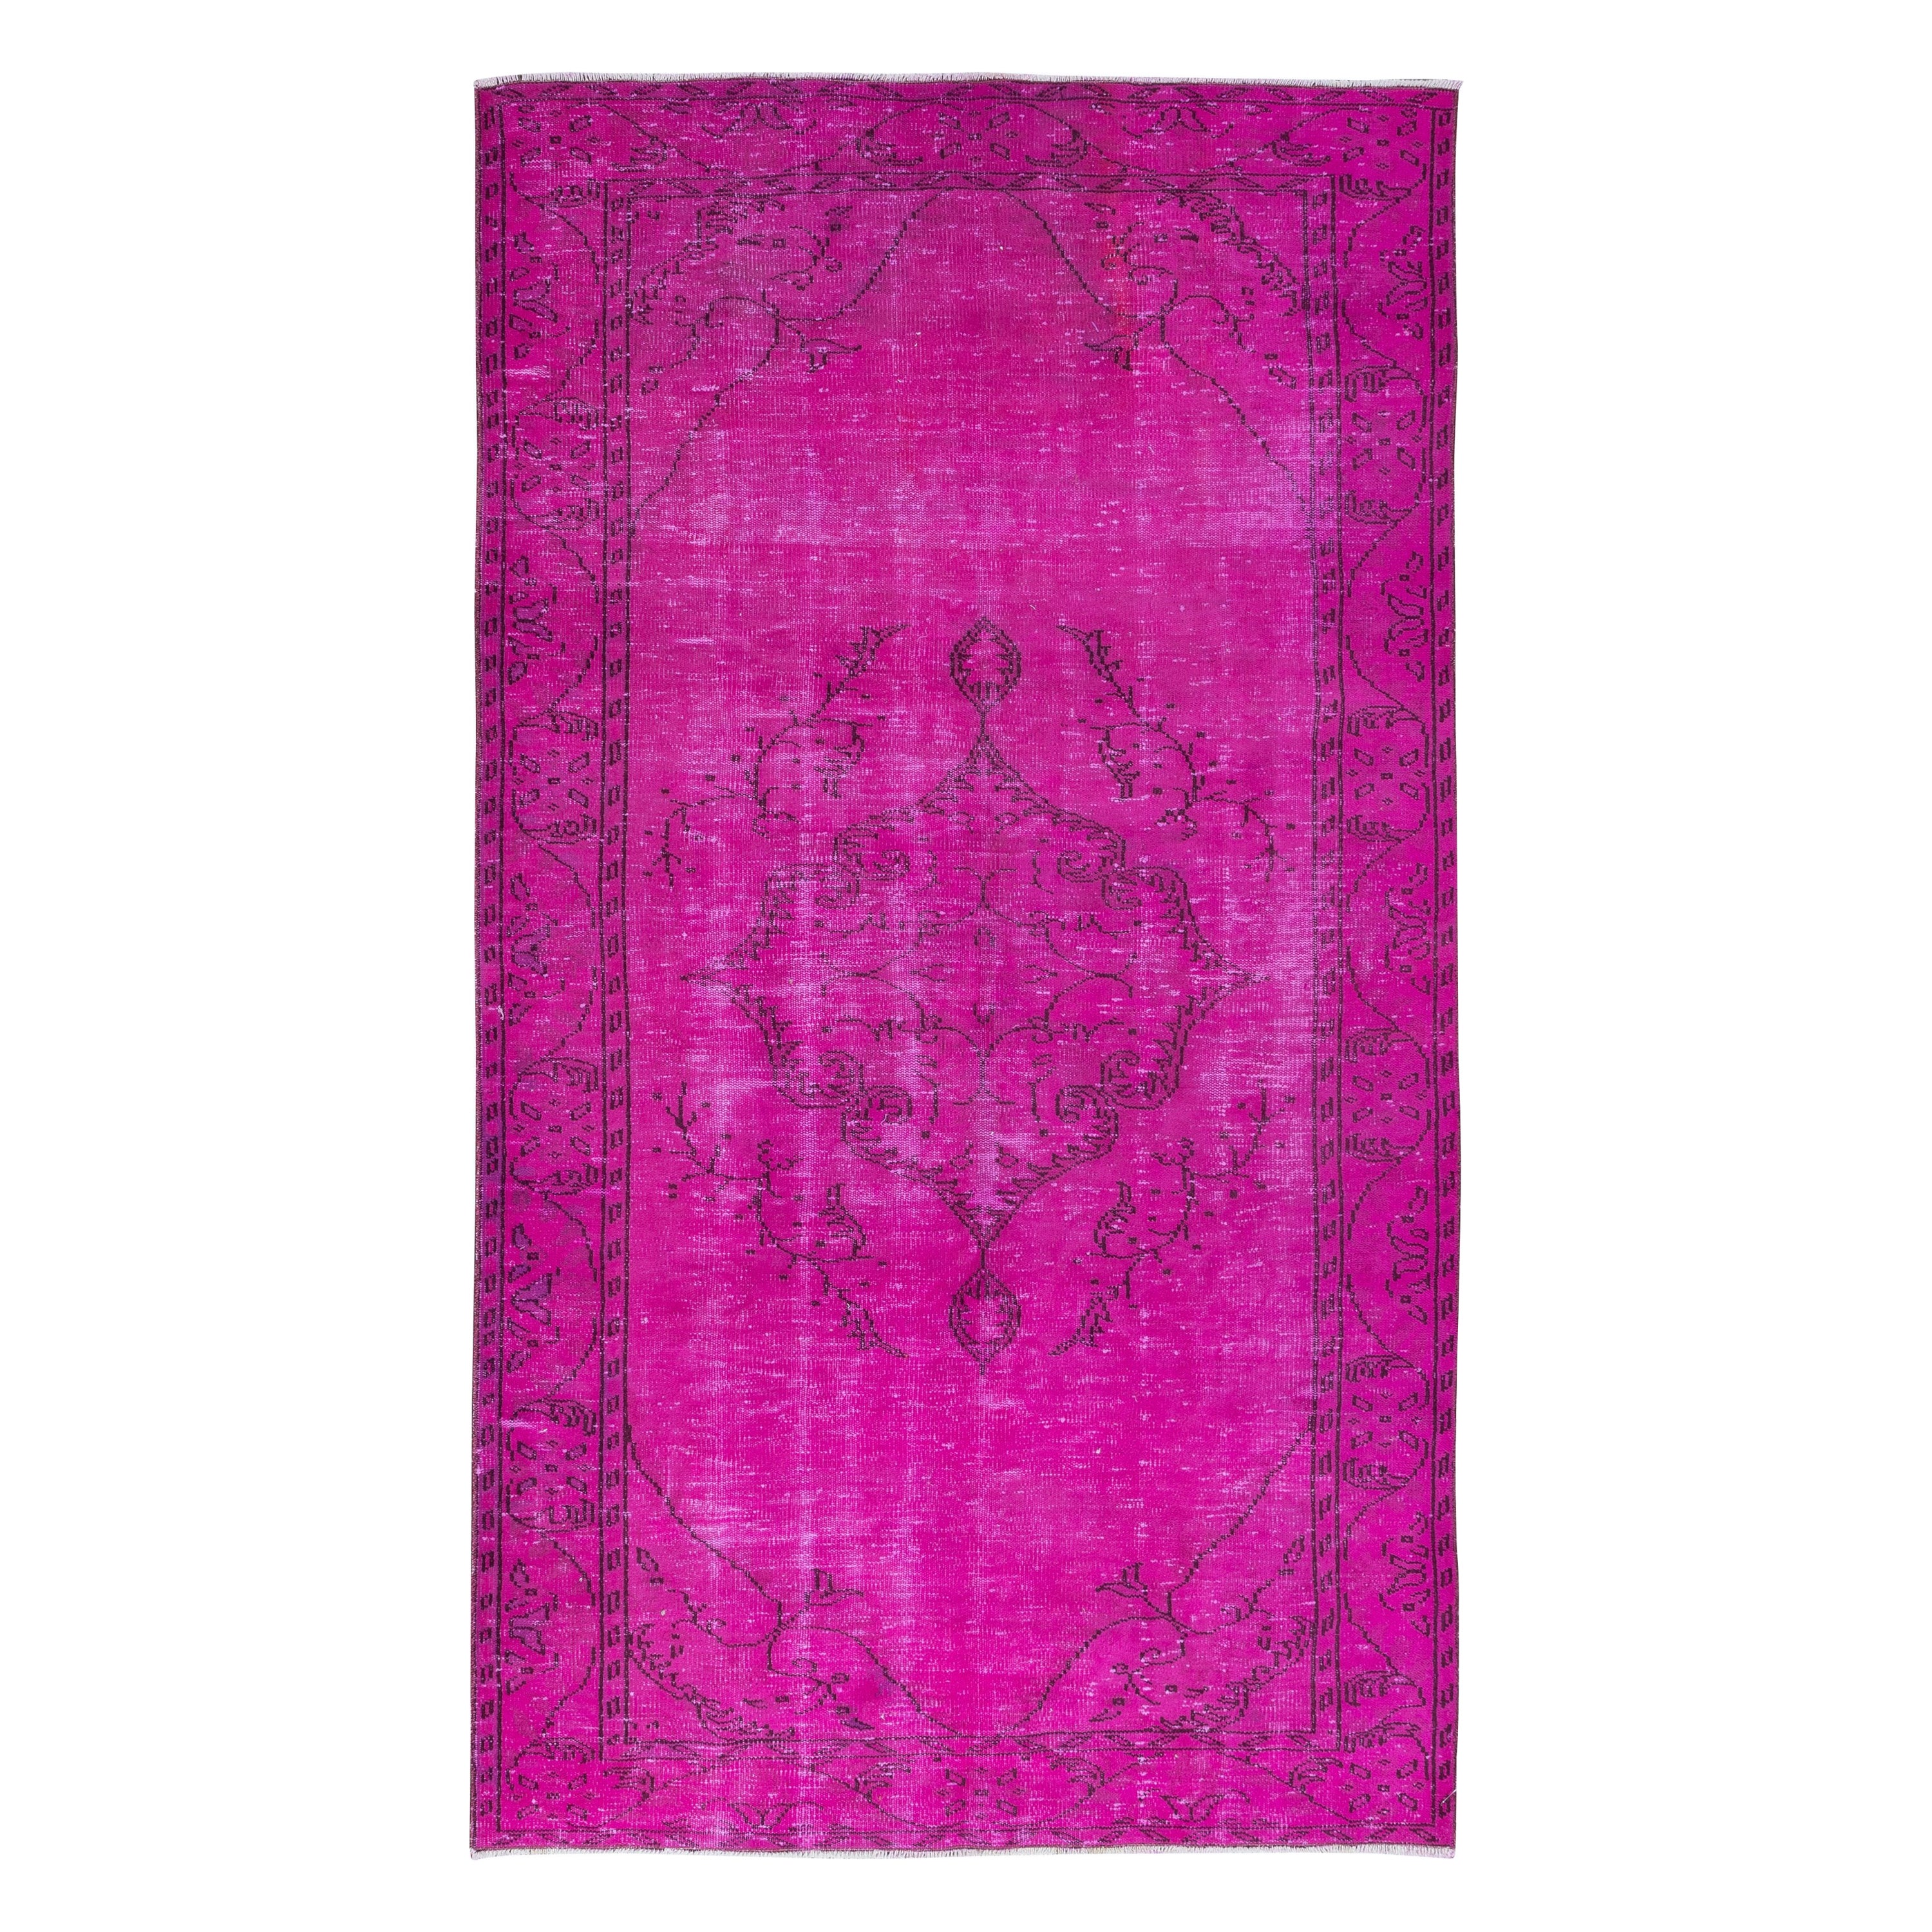 5.4x9.3 Ft Contemporary Wool Area Rug in Pink, Handknotted in Turkey